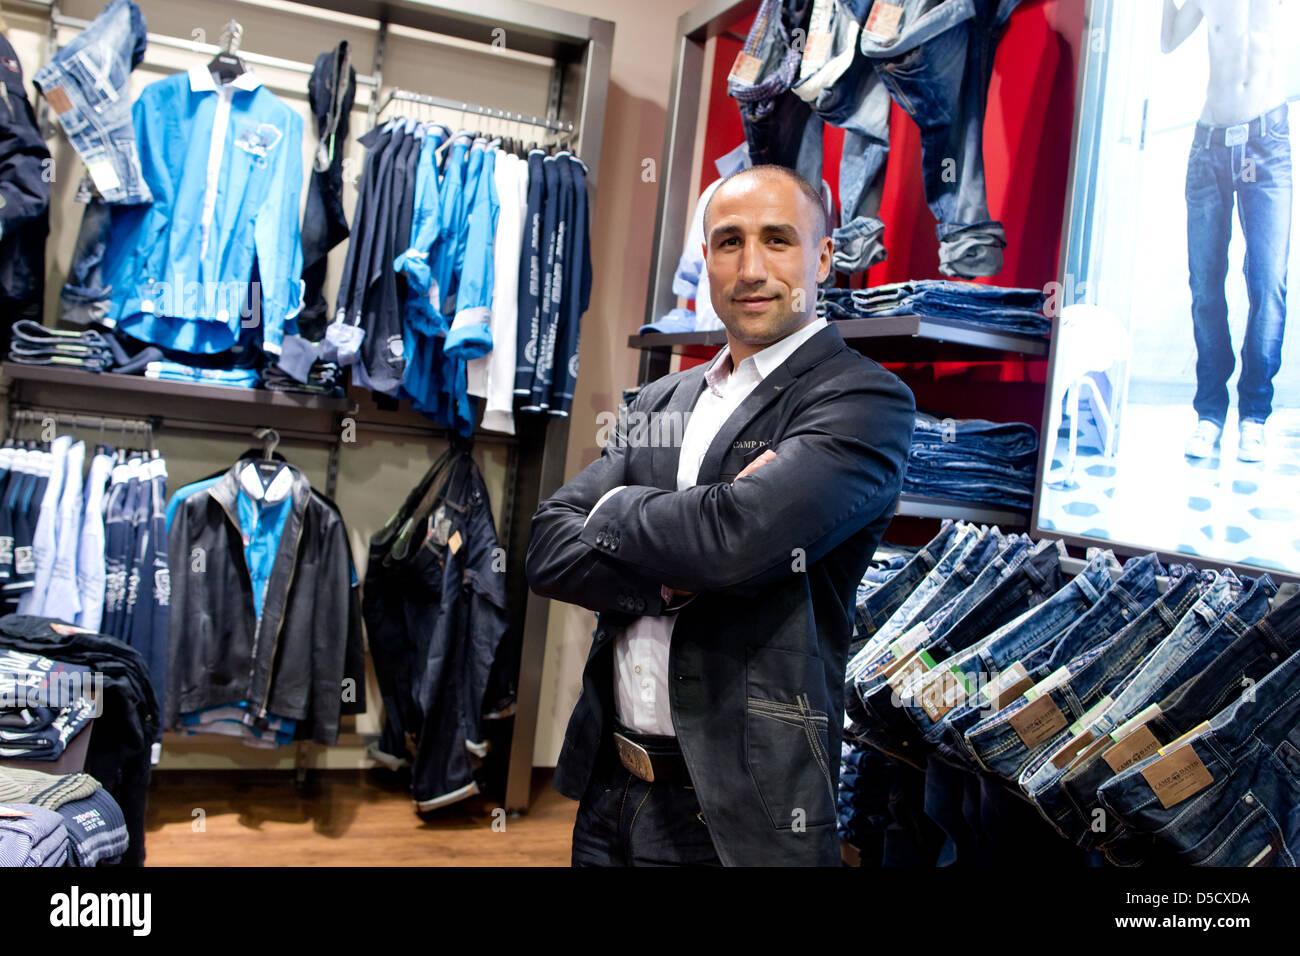 Arthur Abraham at a photocall for the menswear label Camp David at Rhein-Center  Cologne. Cologne, Germany - 08.09.2011 Stock Photo - Alamy